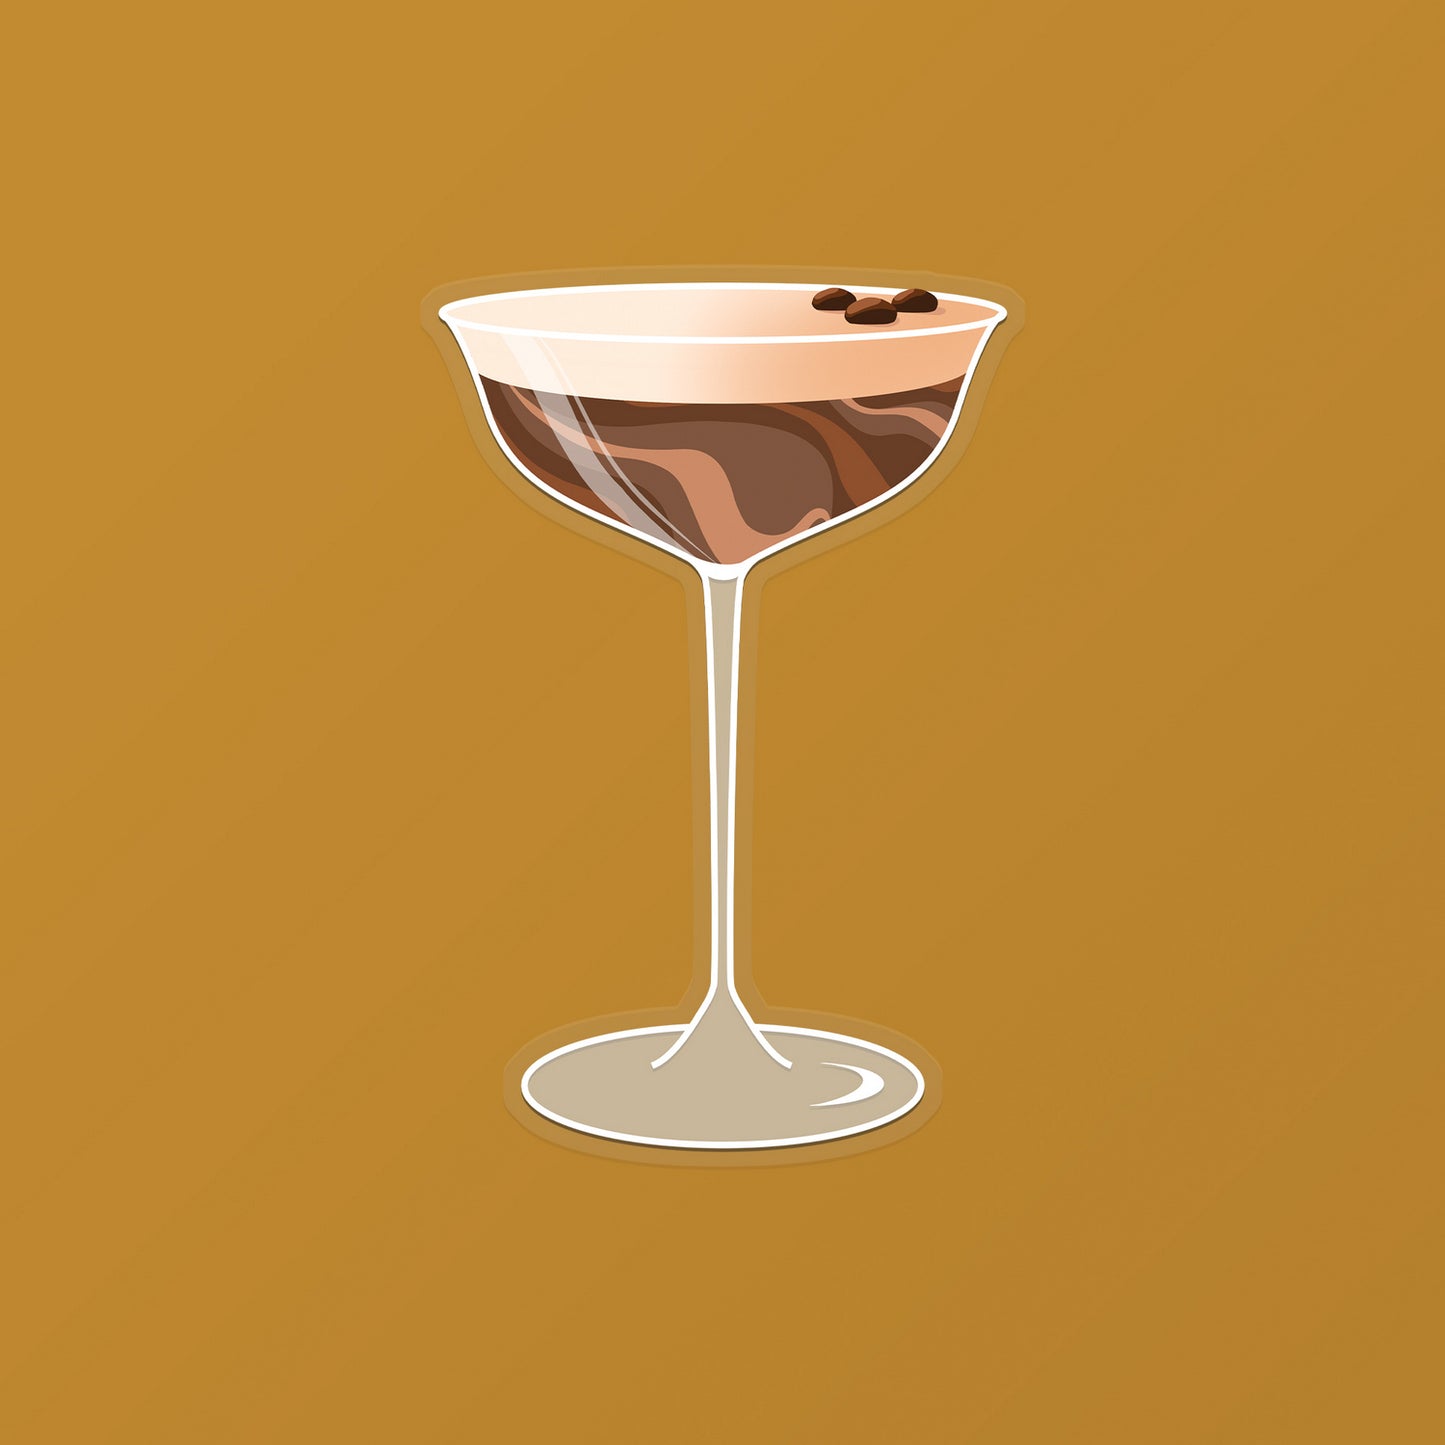 Espresso Martini Cocktail Sticker by Cocktail Critters